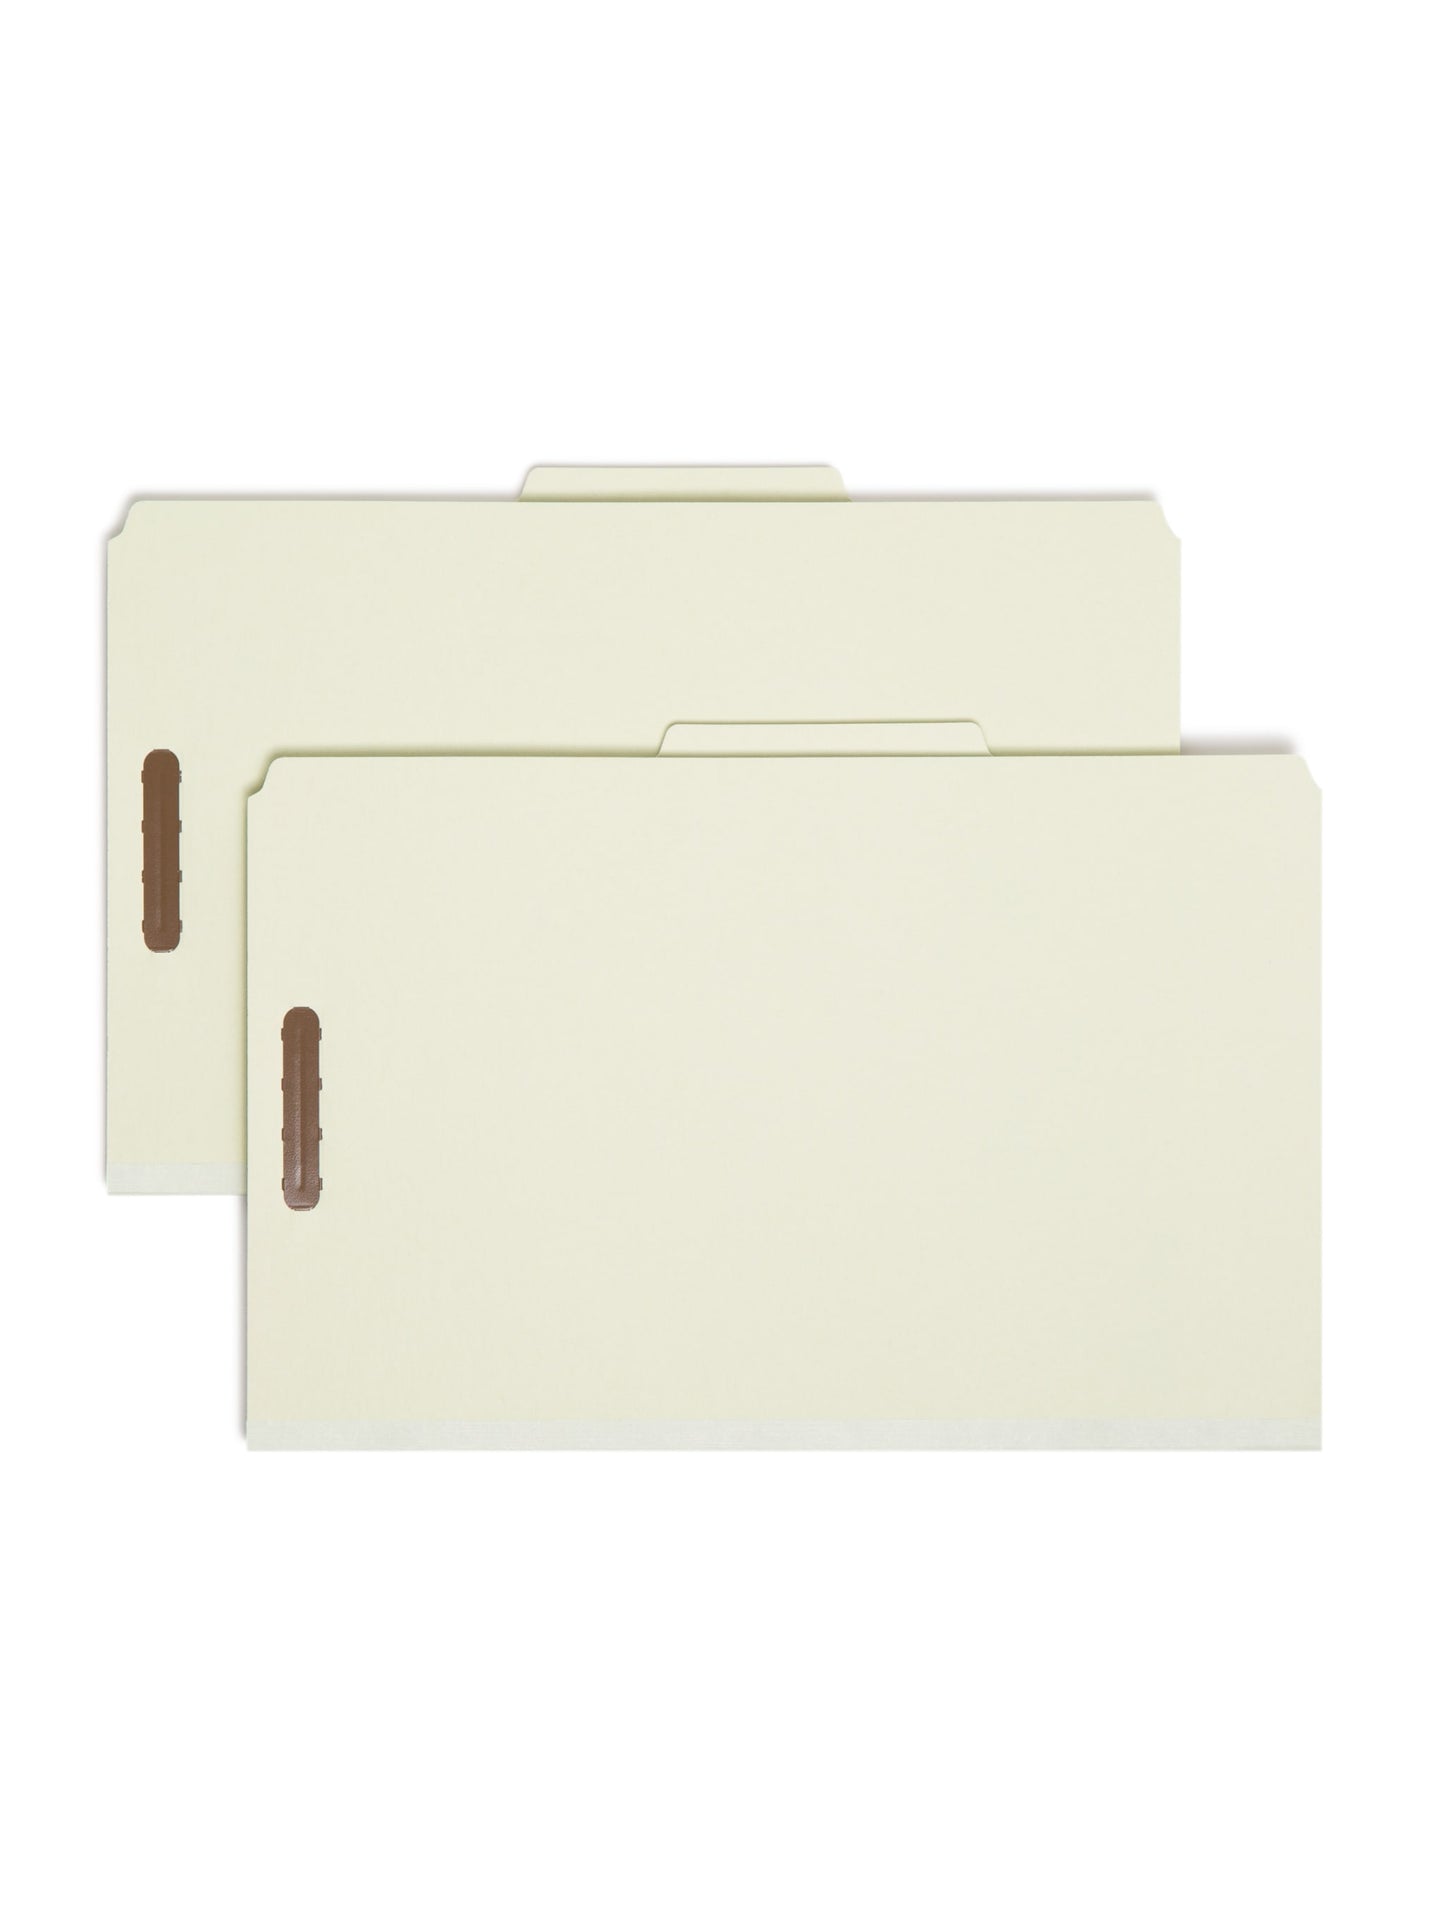 Pressboard Classification File Folders, 2 Dividers, 2 inch Expansion, Gray/Green Color, Legal Size, Set of 0, 30086486190221